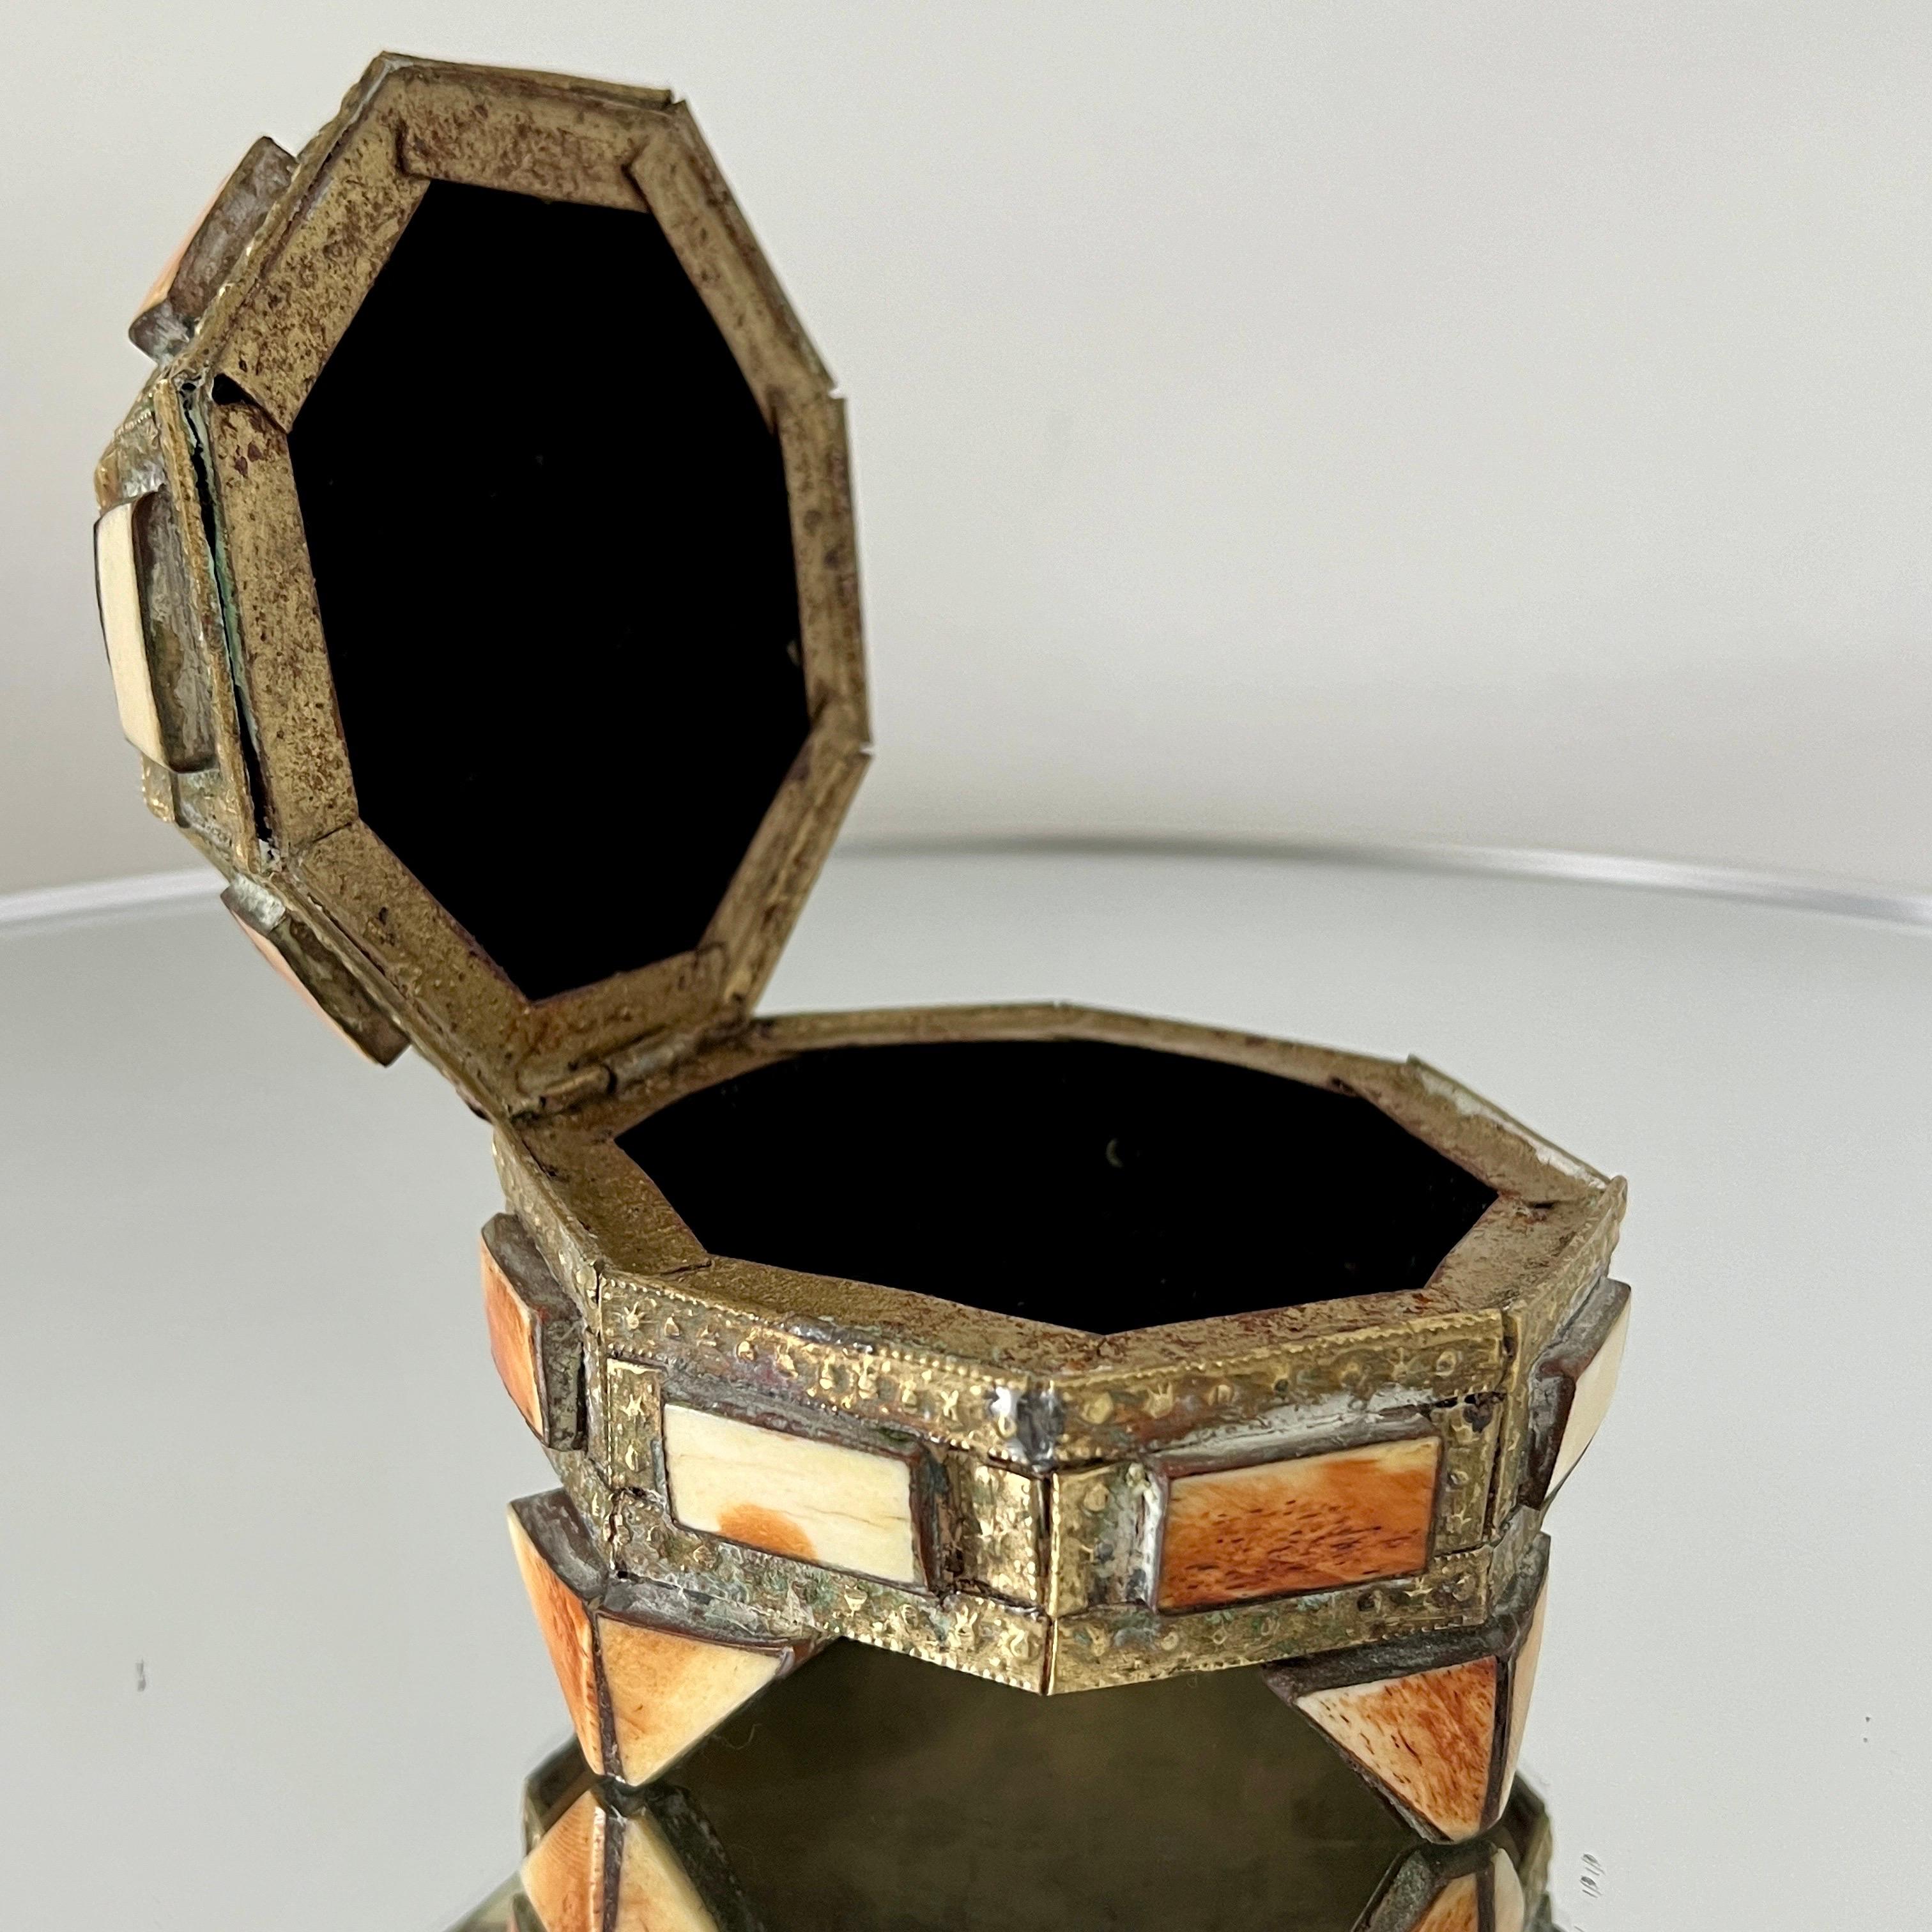 Geometric Trinket Box in Brass with Bone Inlay, Handcrafted in Morocco, 1970's For Sale 1